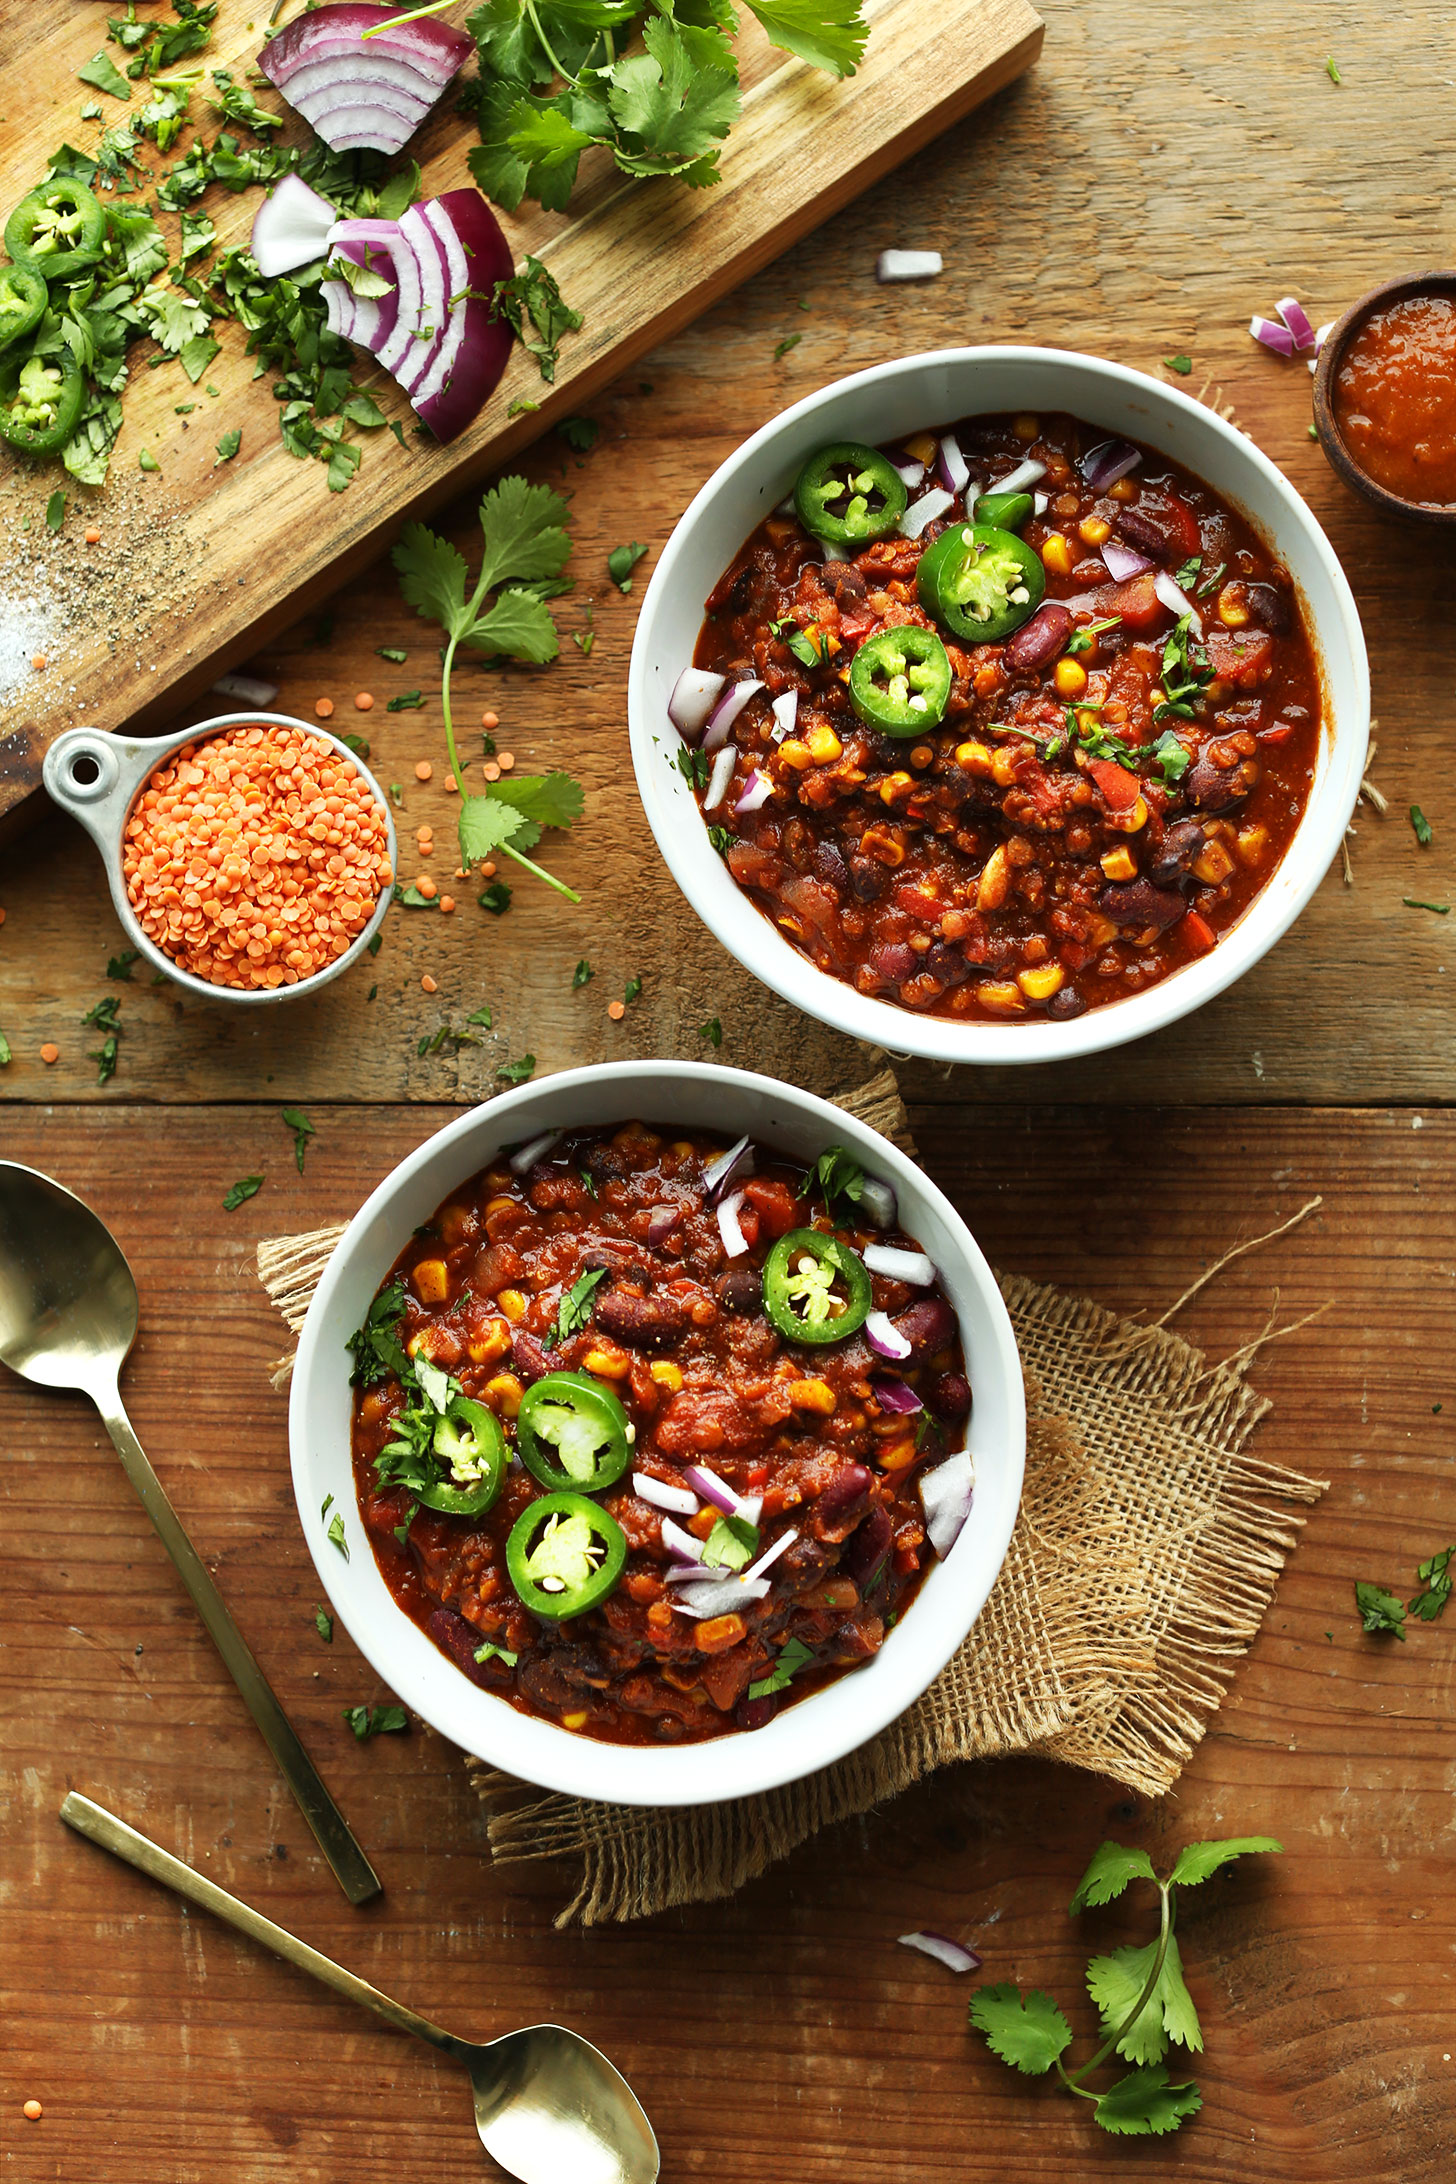 Two bowls of our Lentil and Black Bean Chili for a protein- and fiber-packed vegan meal